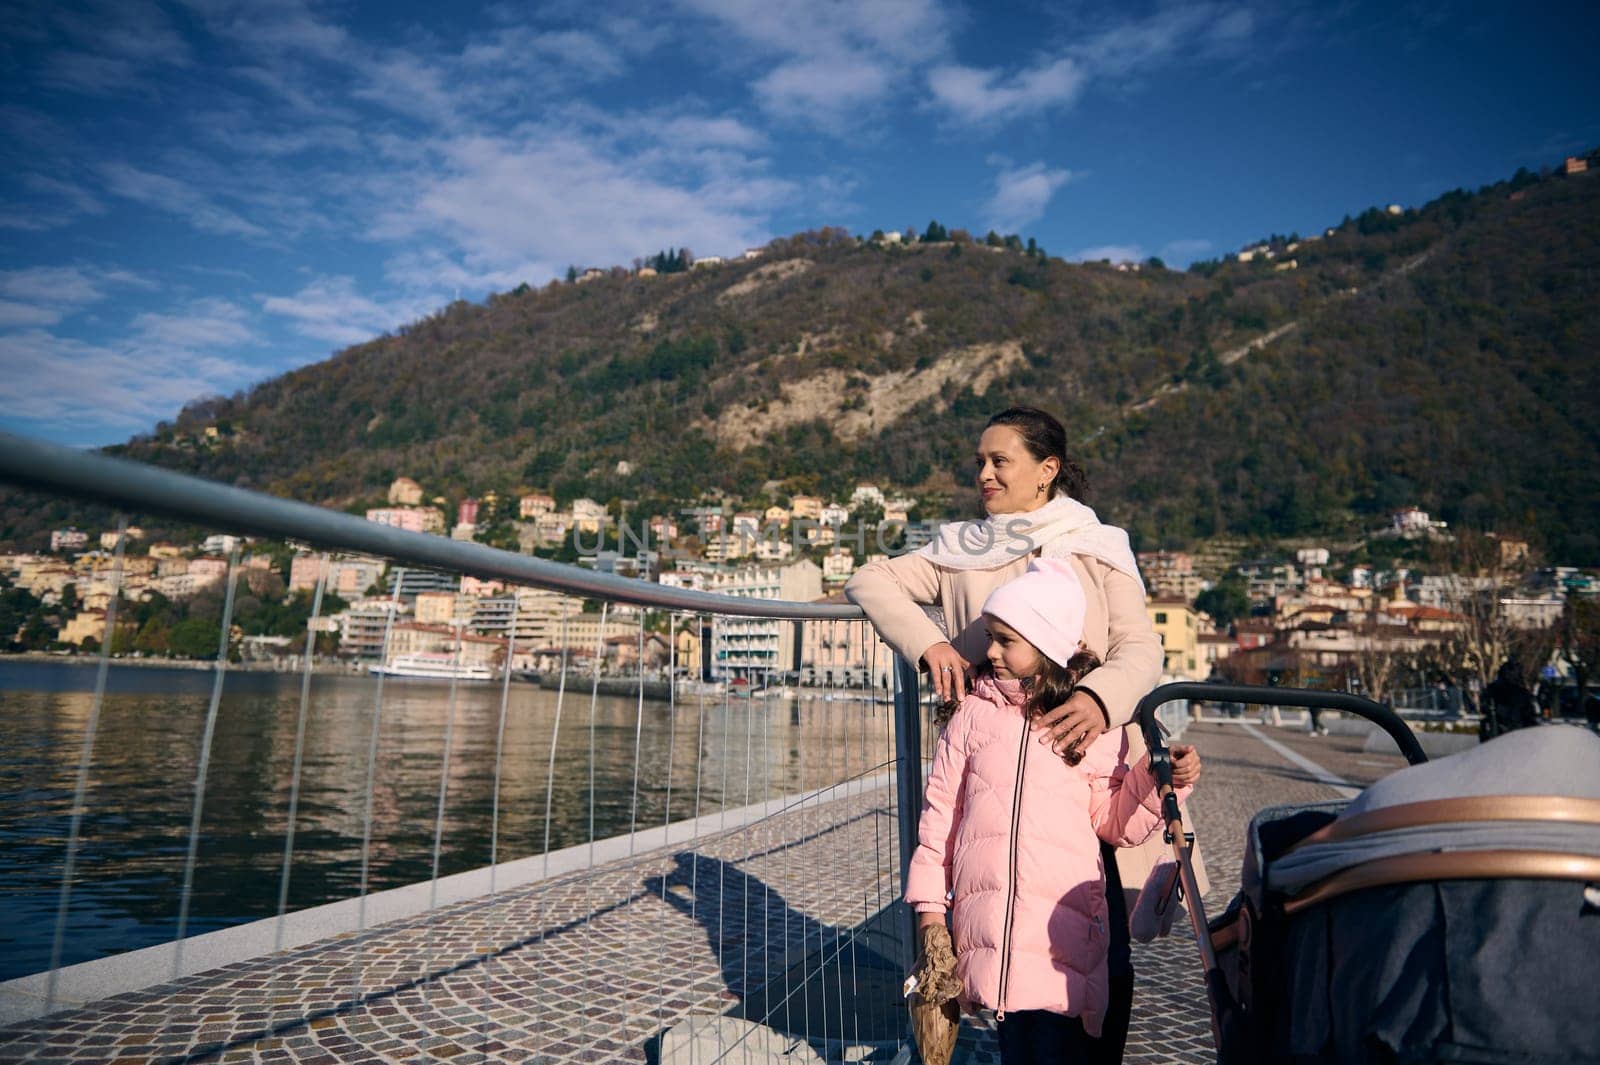 Beautiful smiling woman and her little kid, a cute daughter walking on the promenade near the lake of Como. Stylish baby pram in the foreground by artgf